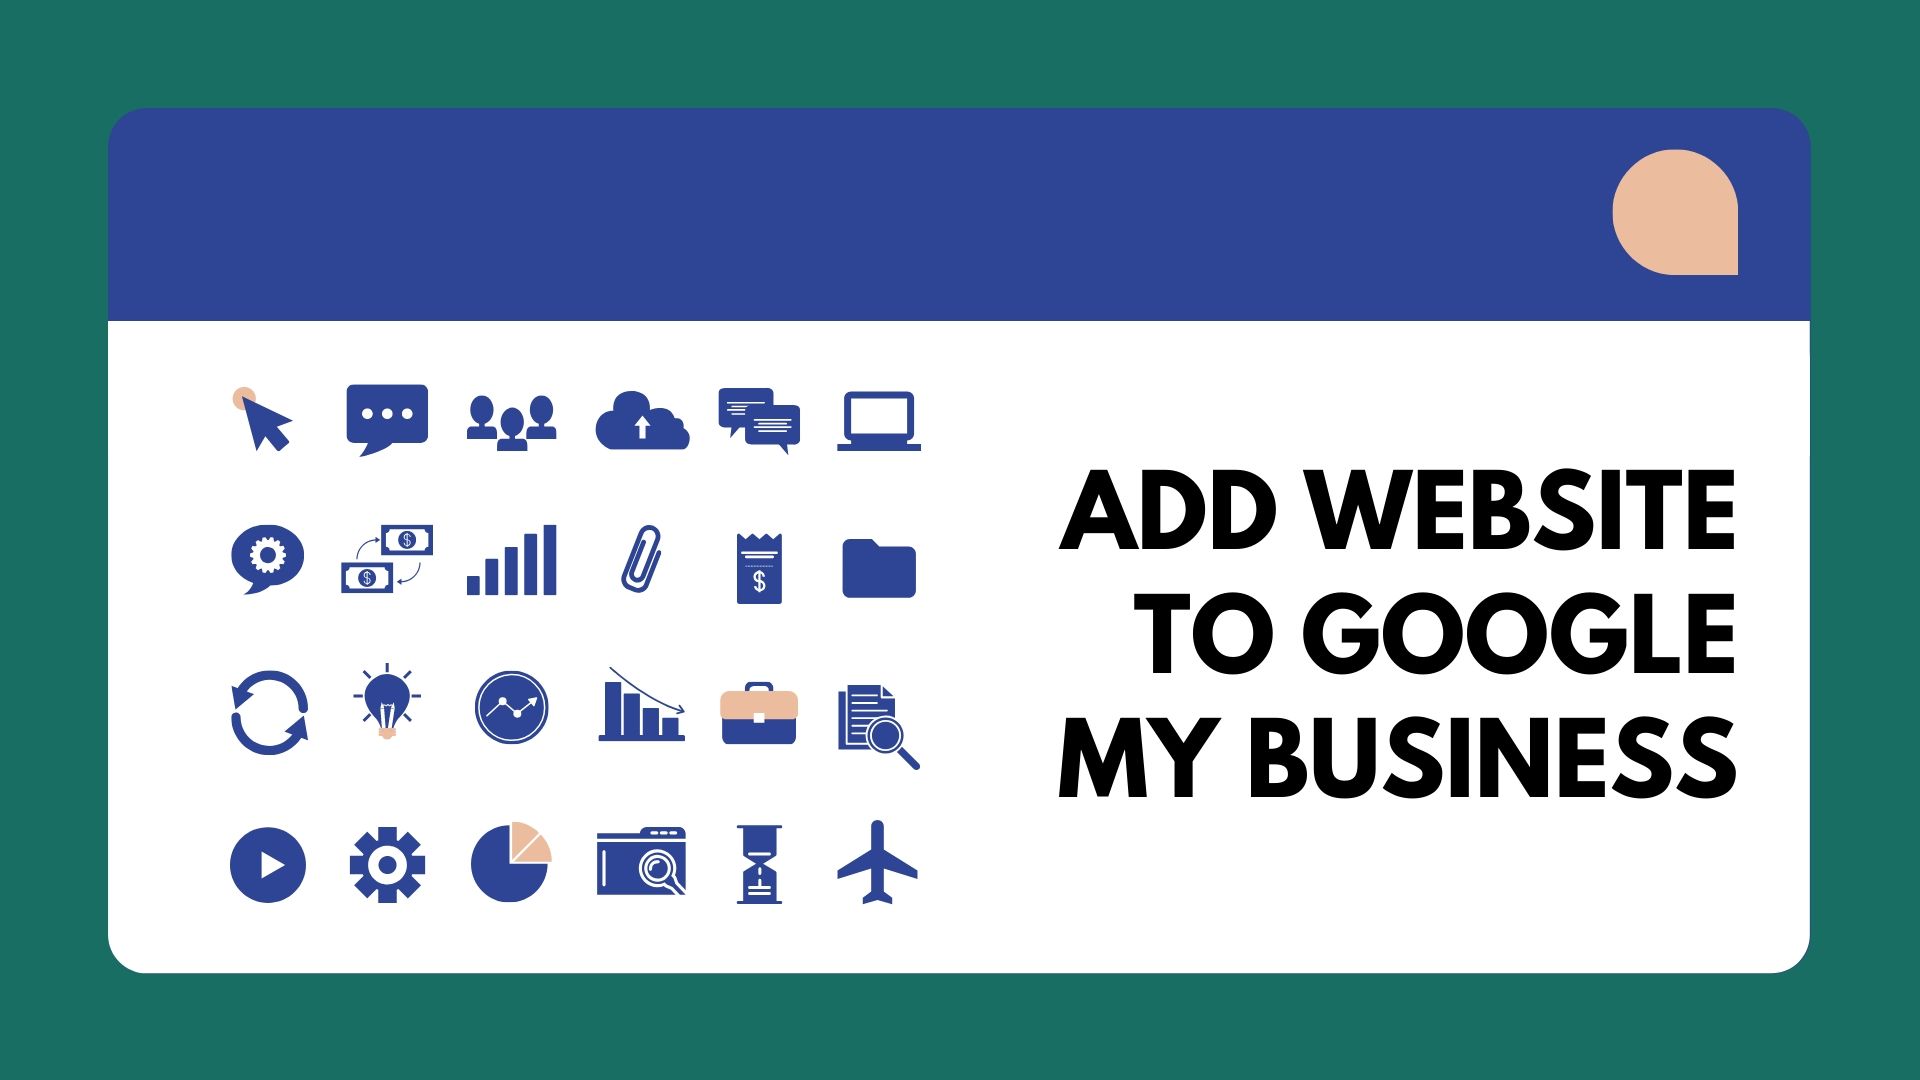 ADD WEBSITE TO GOOGLE MY BUSINESS﻿